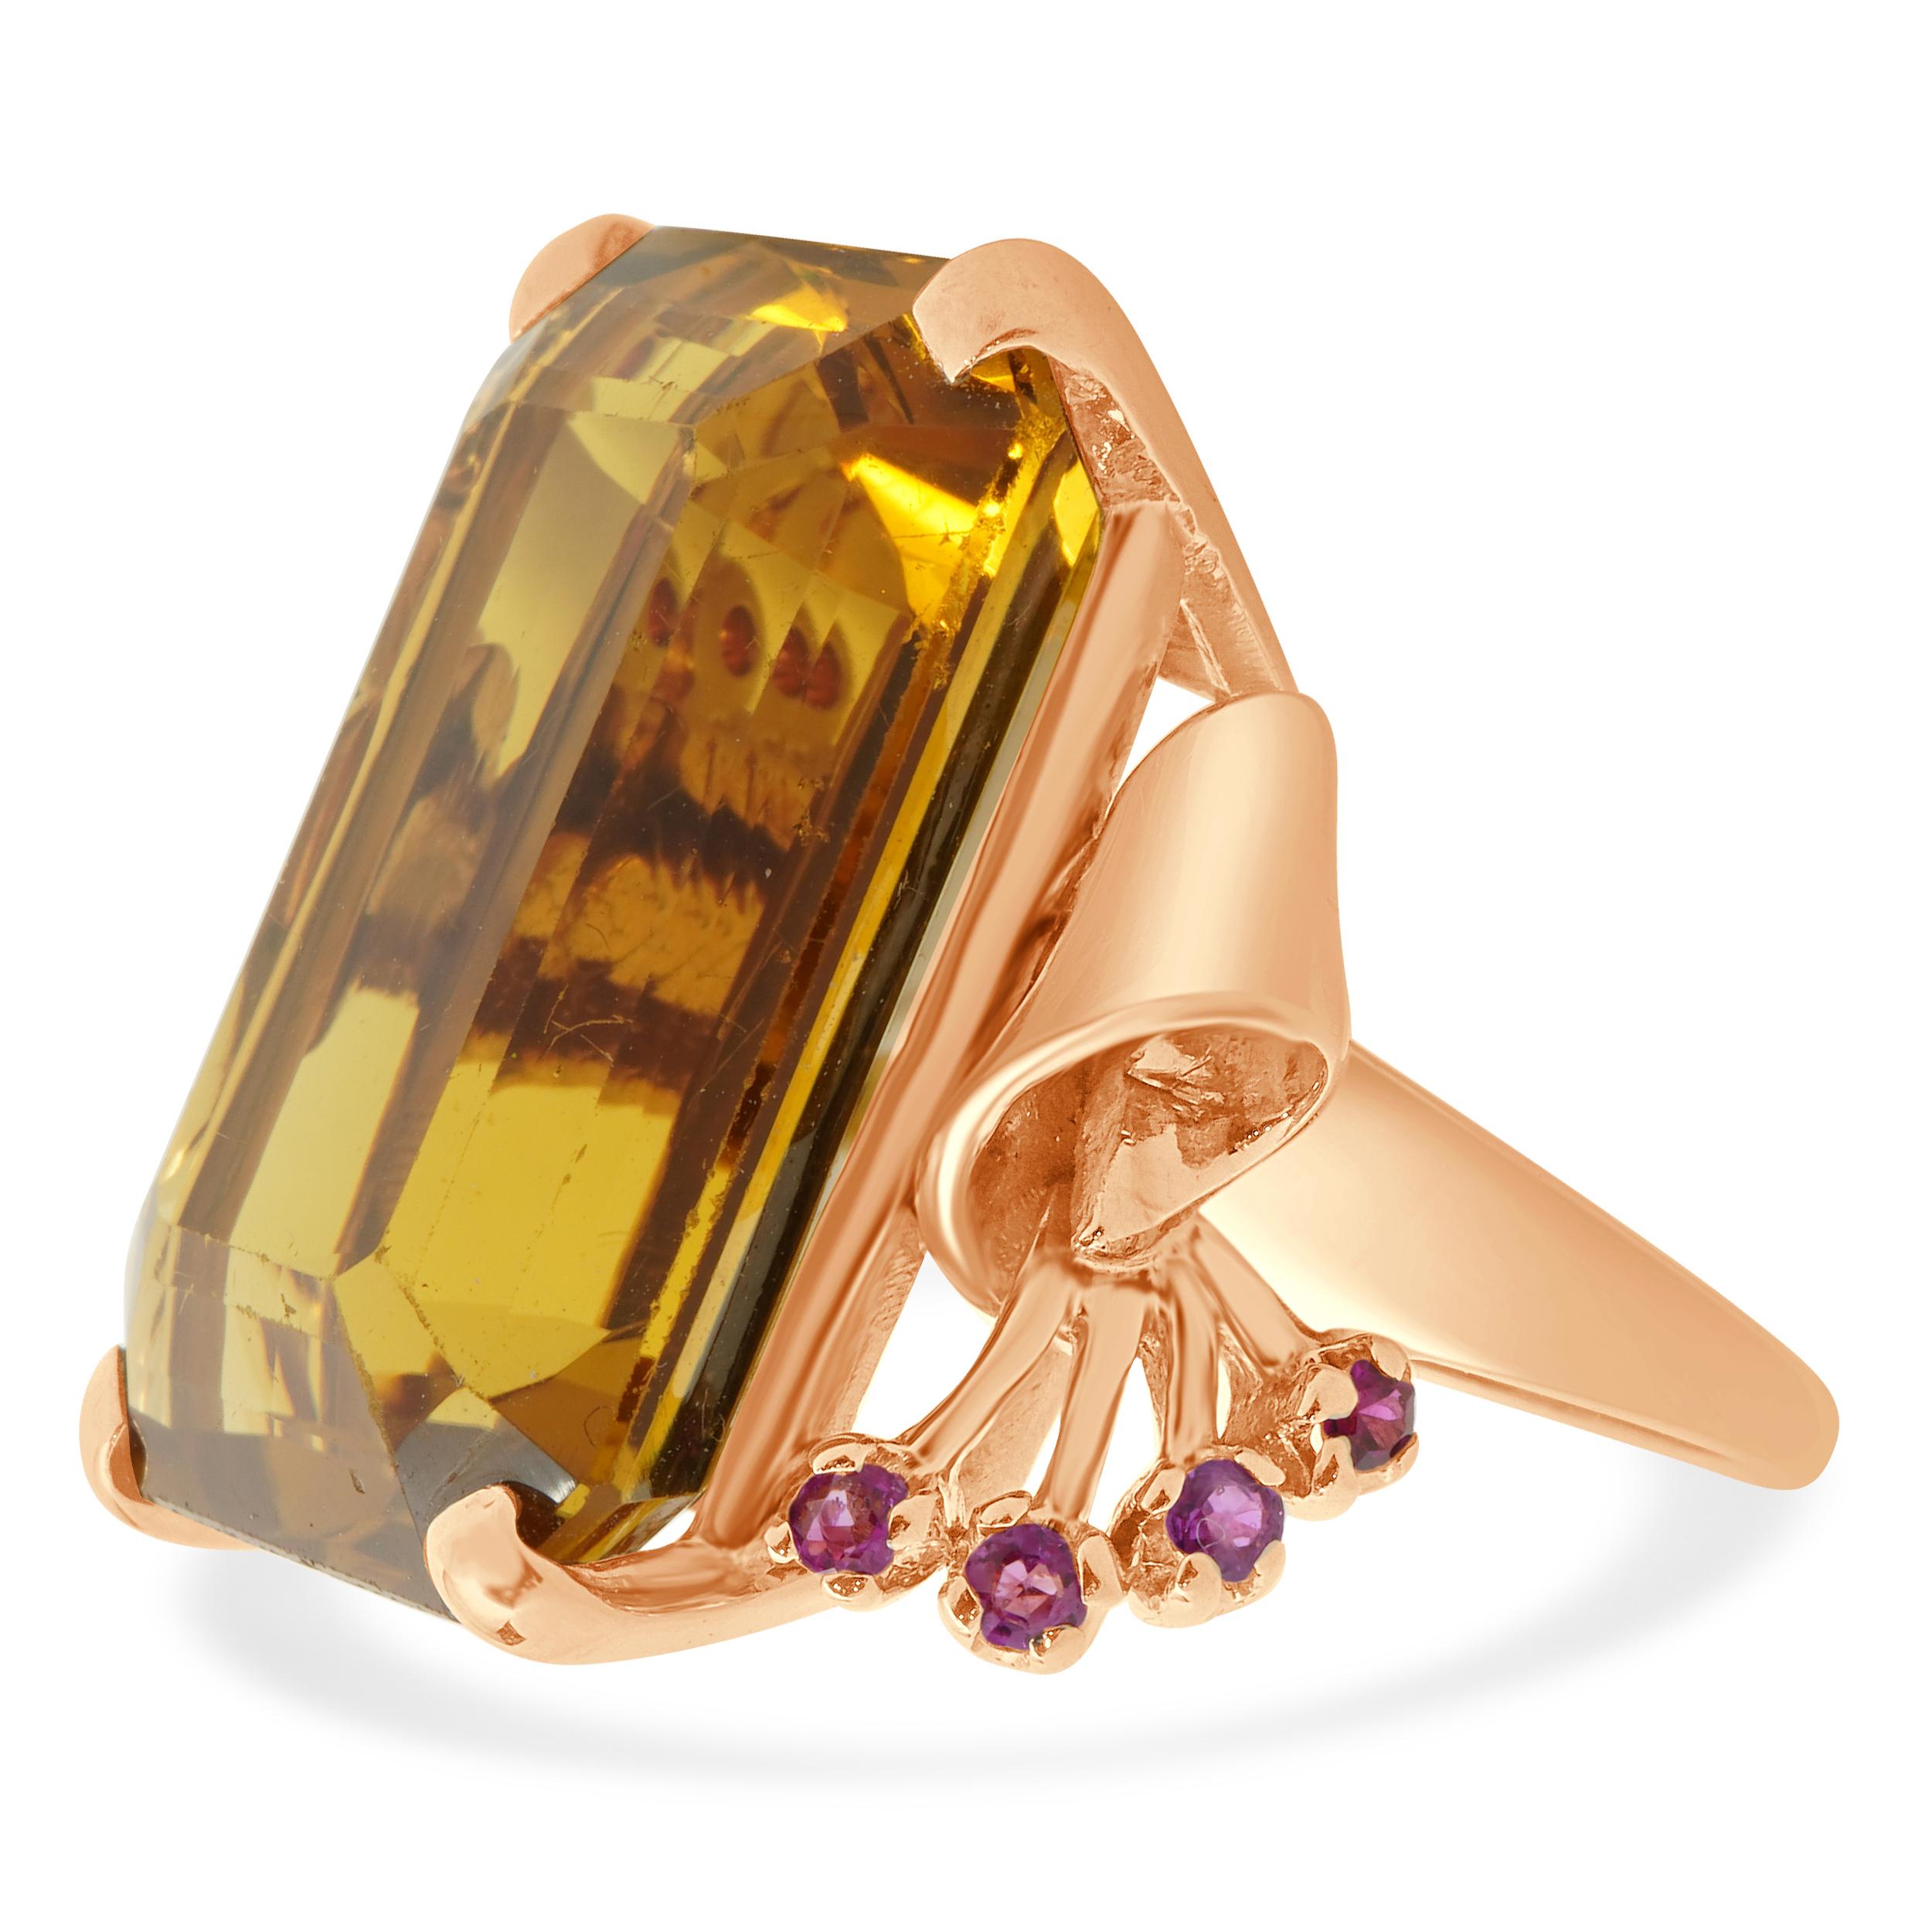 Material: 18K rose gold
Citrine: 1 emerald cut = 35.32ct
Ruby: 8 round cut
Ring Size: 7 (please allow up to 2 additional business days for sizing requests)
Dimensions: ring top measures 25mm
Weight: 18.11 grams
